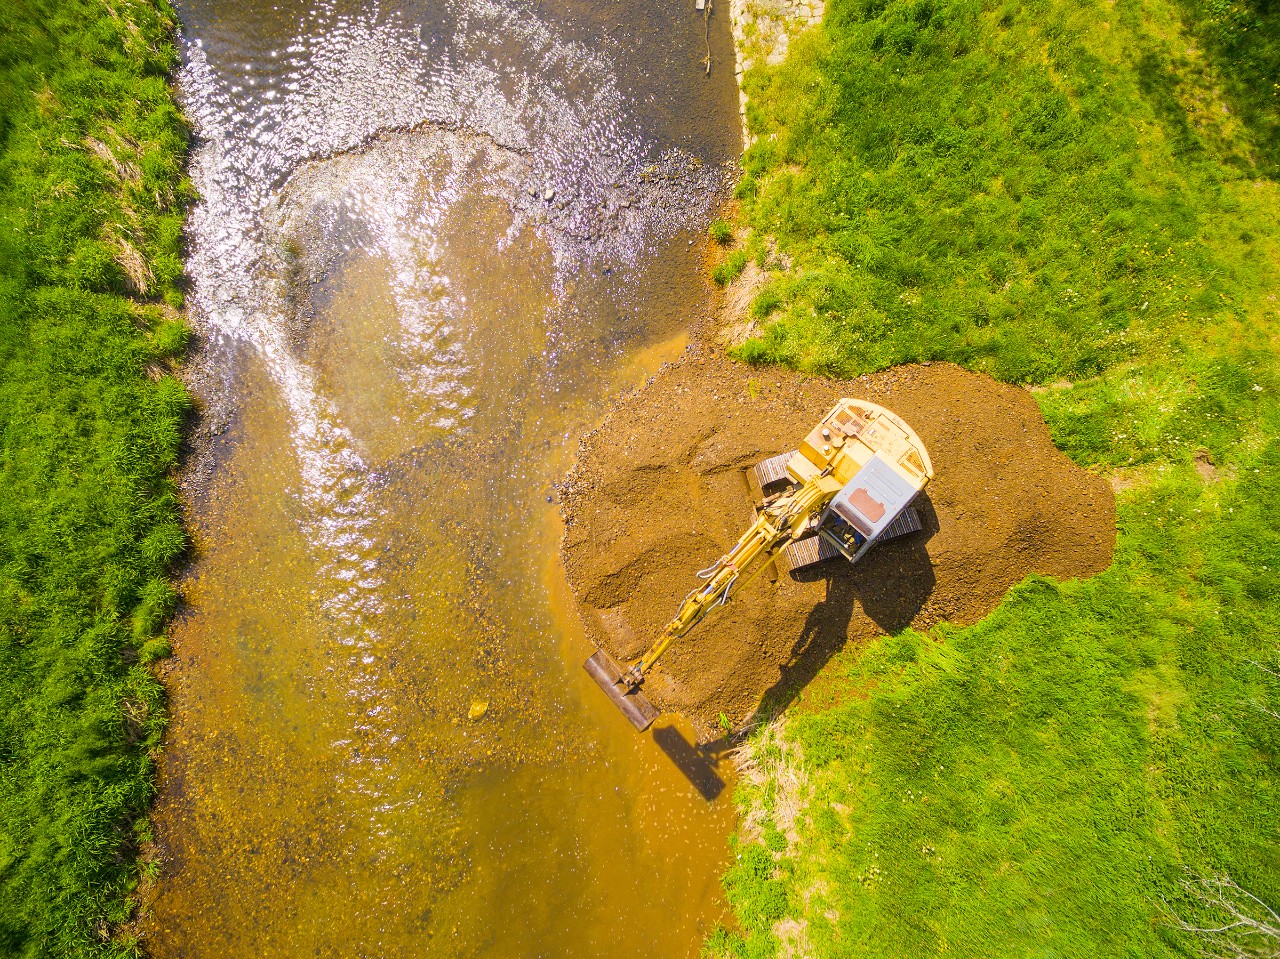 Looking down at an excavator mining alongside a river